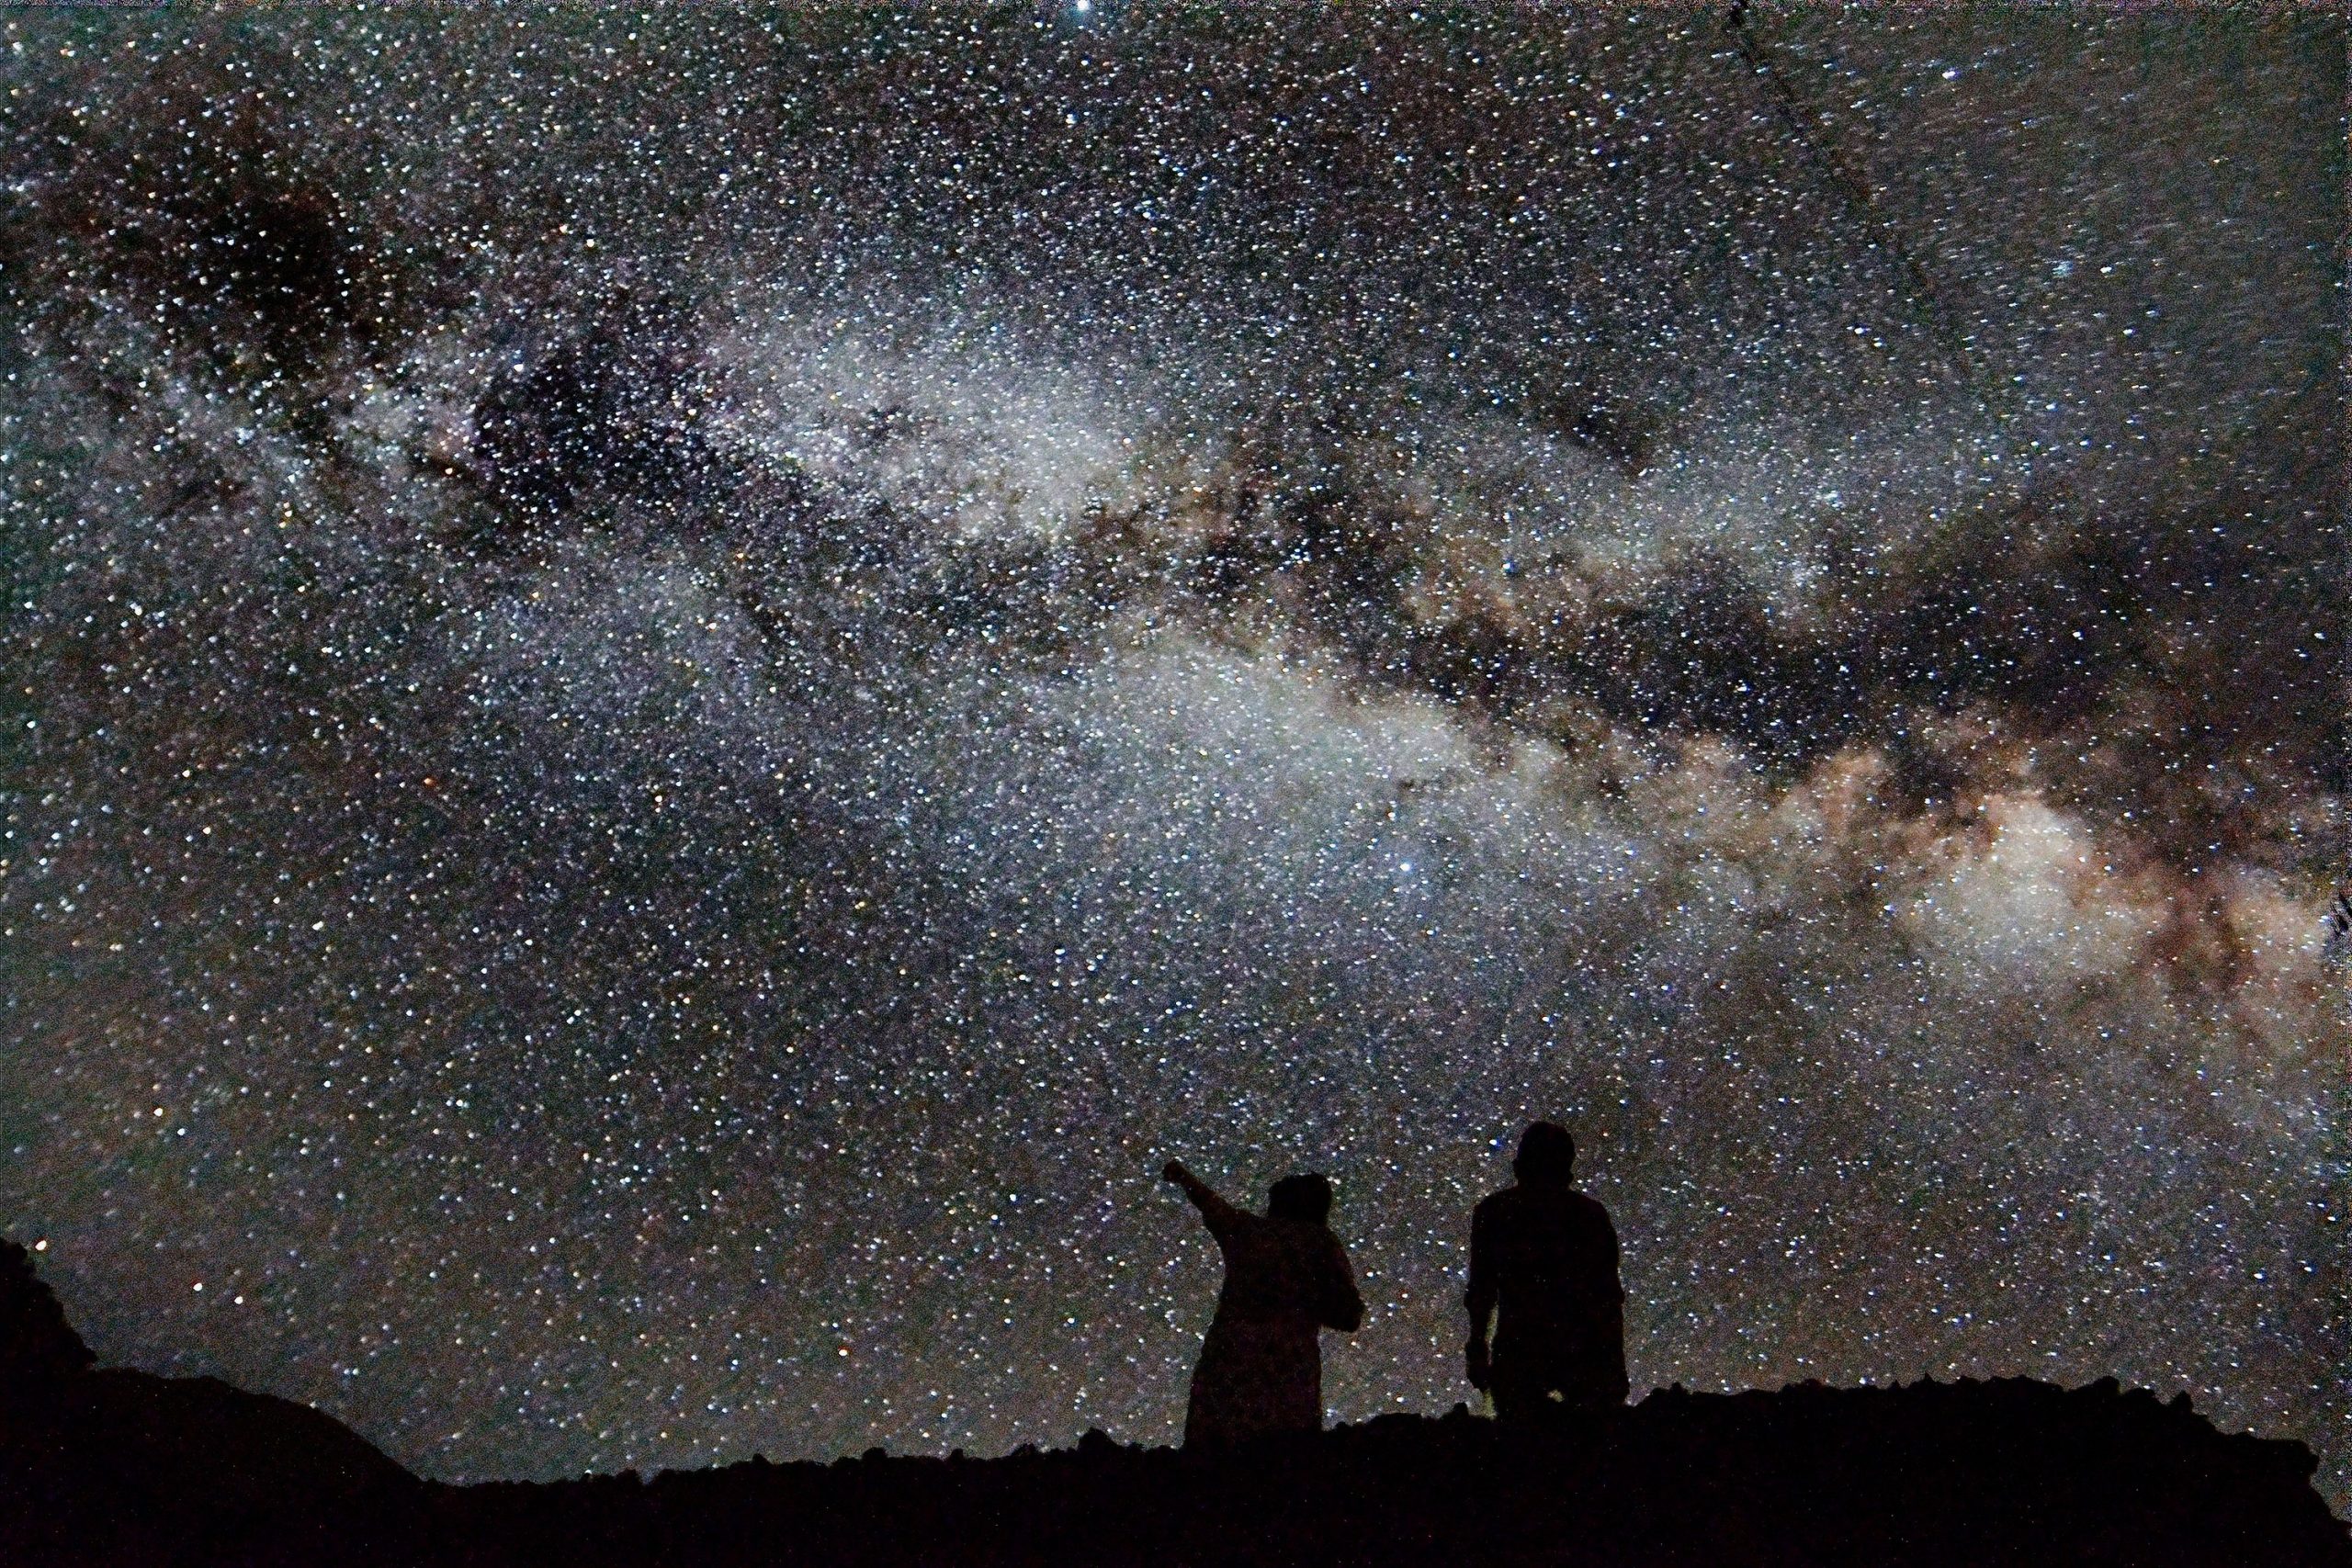 Two figures, one pointing at the sky, appear in silhouette against a densely starry sky with no light pollution, dominated by the Milky Way stretching from left to right with the dark dust lanes prominent